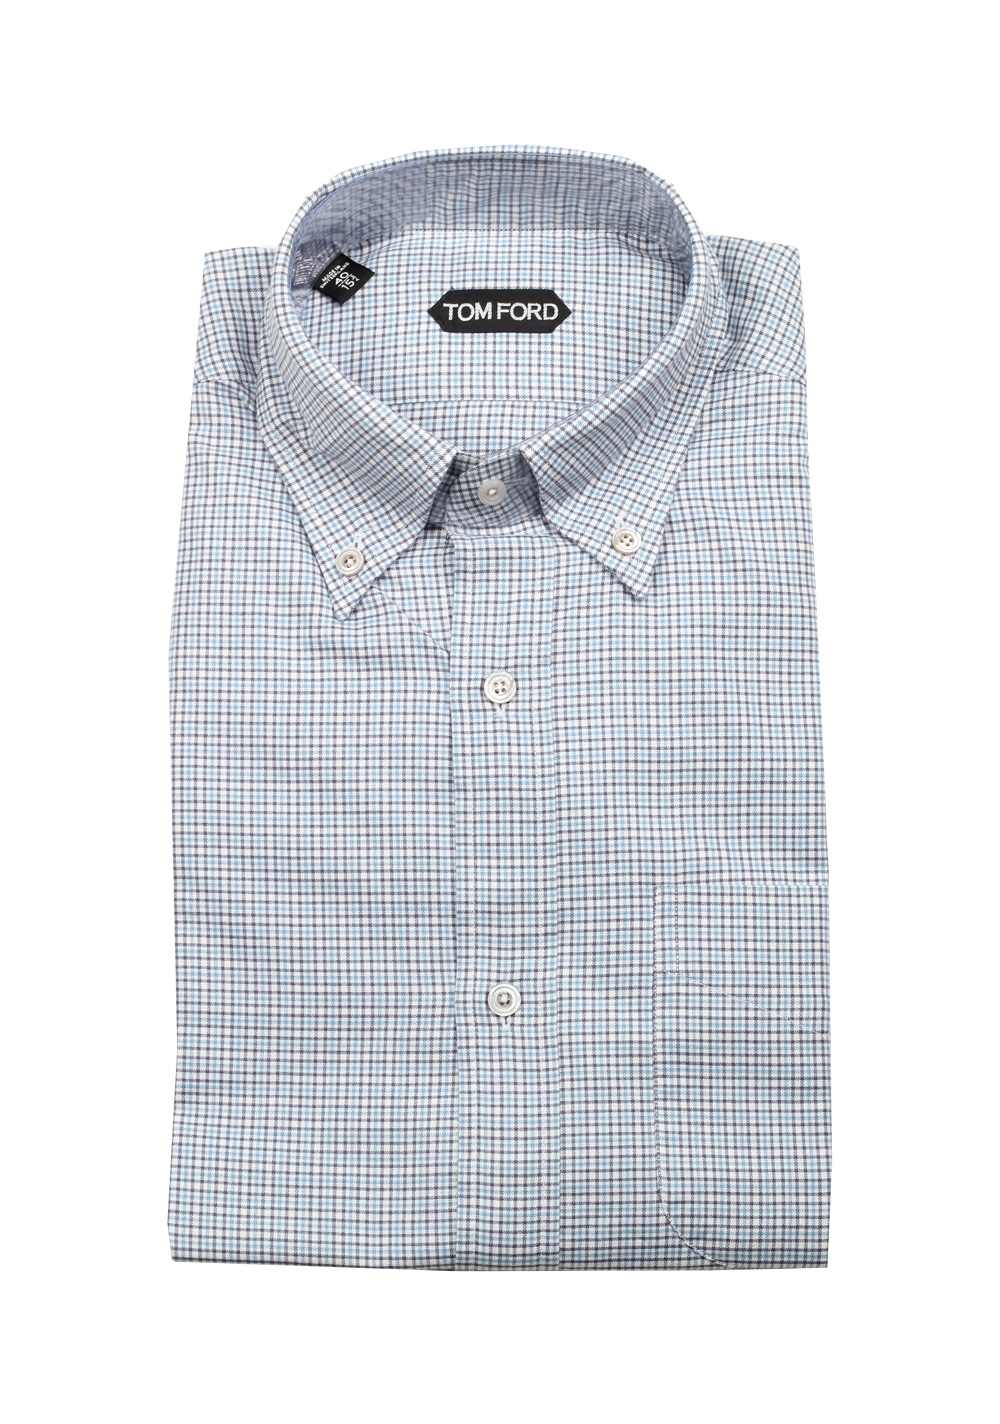 TOM FORD Checked White Blue Button Down Dress Shirt Size 40 / 15,75 U.S ...